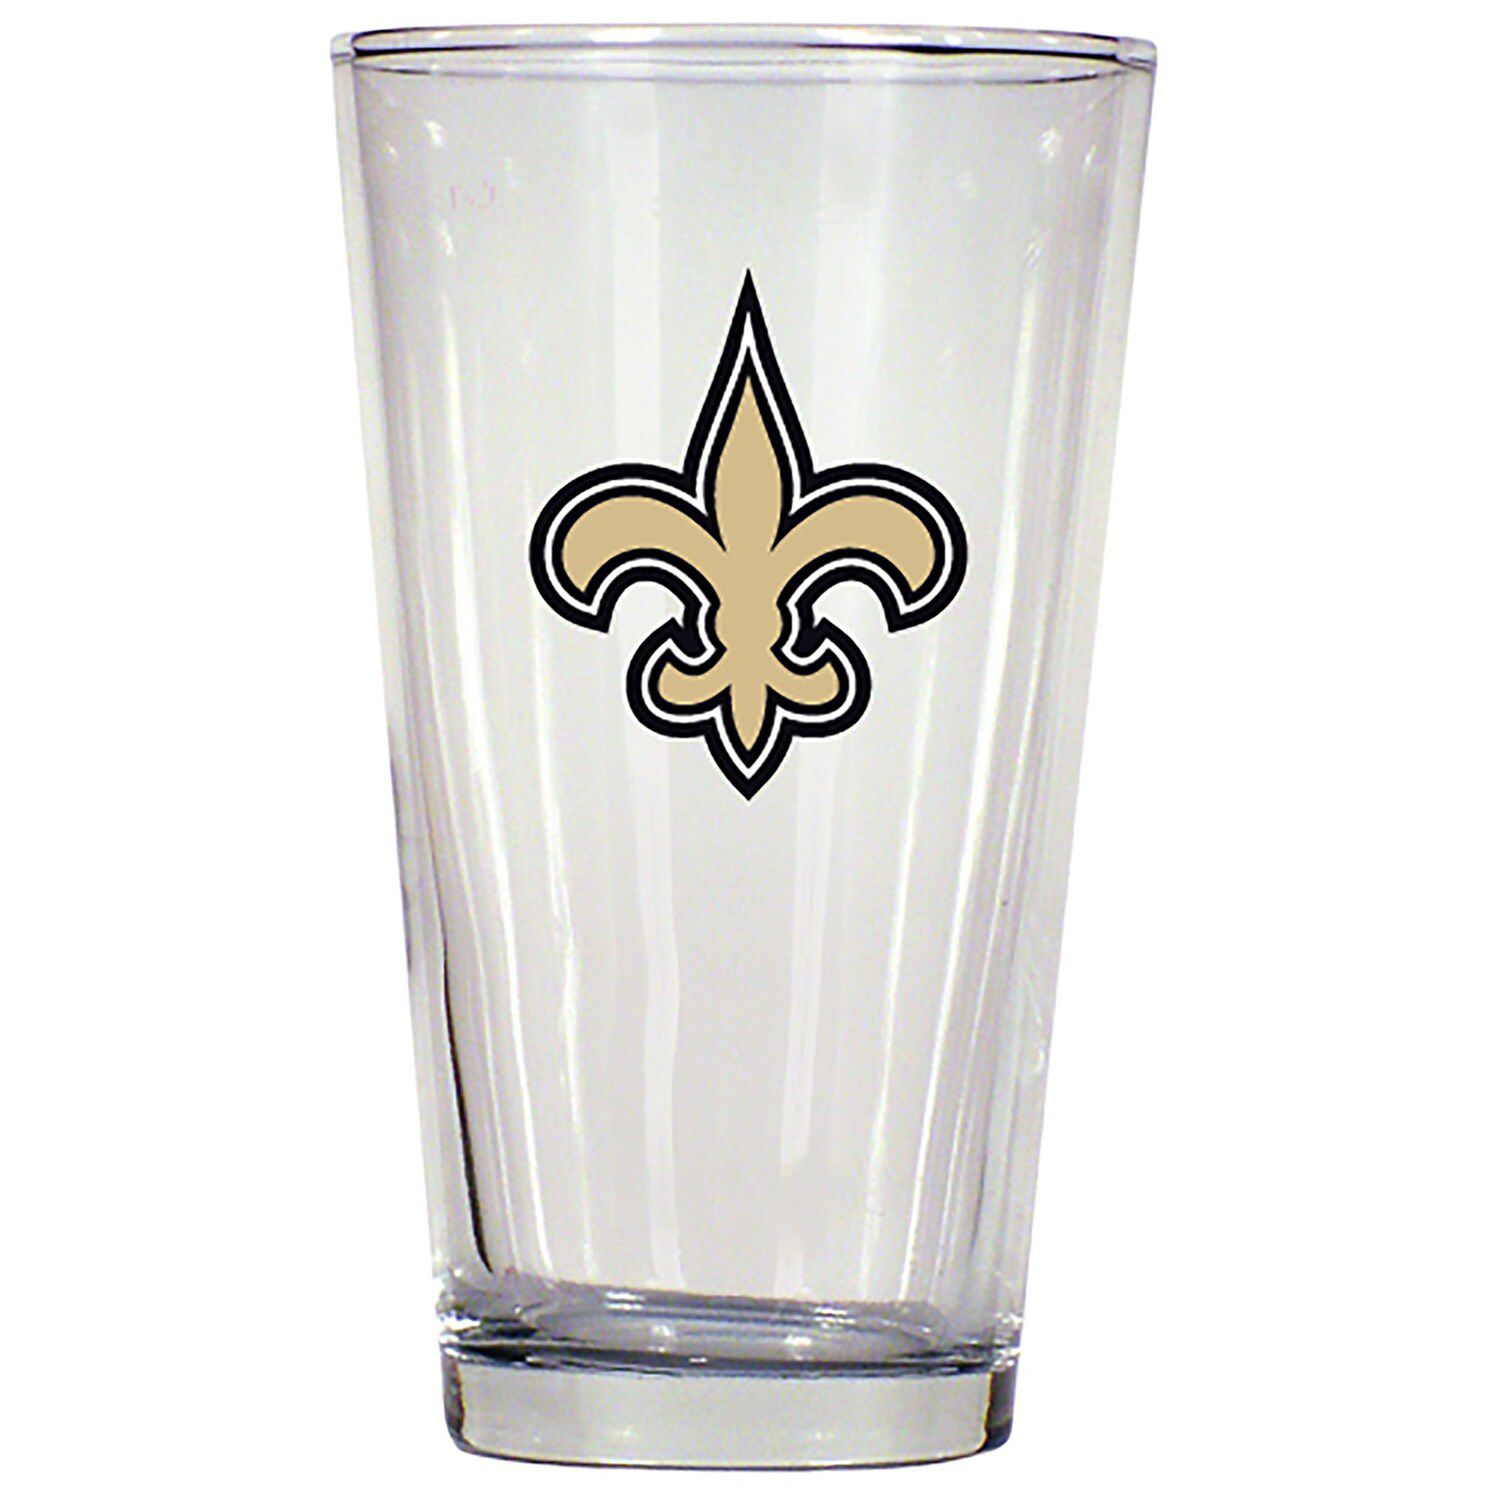 Image for Unbranded New Orleans Saints 16oz. Mixing Glass at Kohl's.